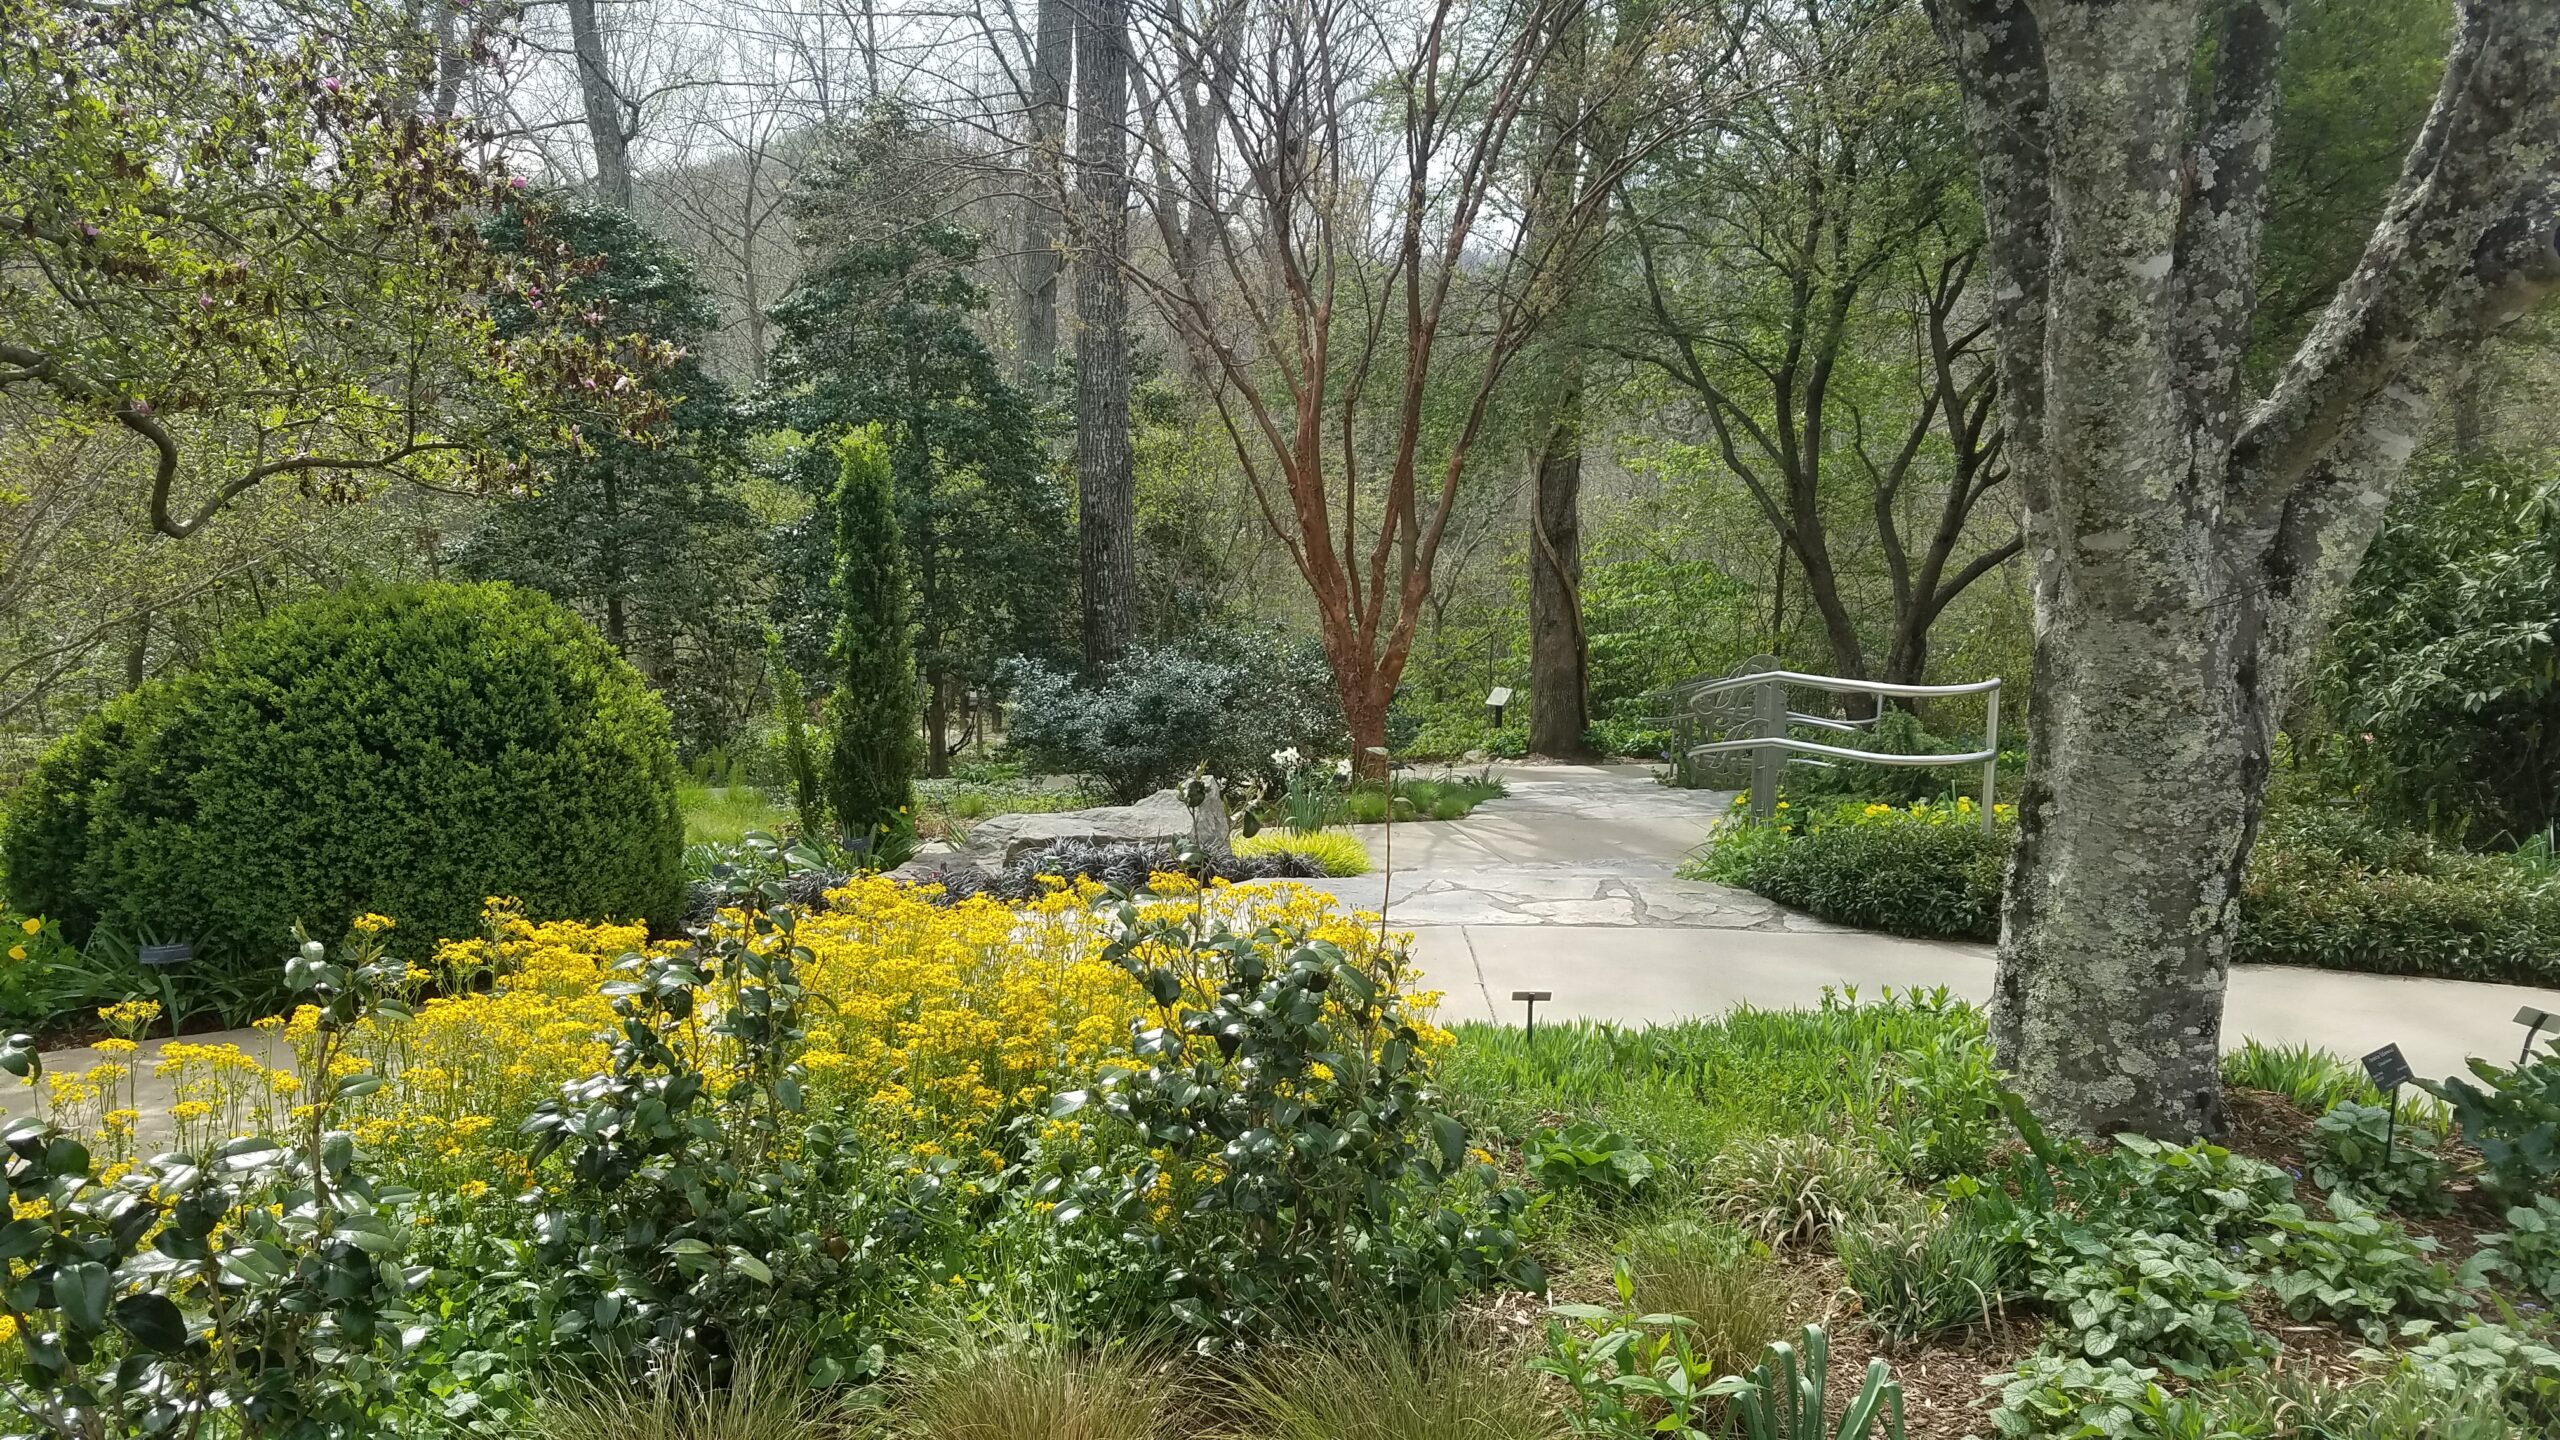 A flowering spring garden in a park-like setting with paved walkways meandering through the flowers